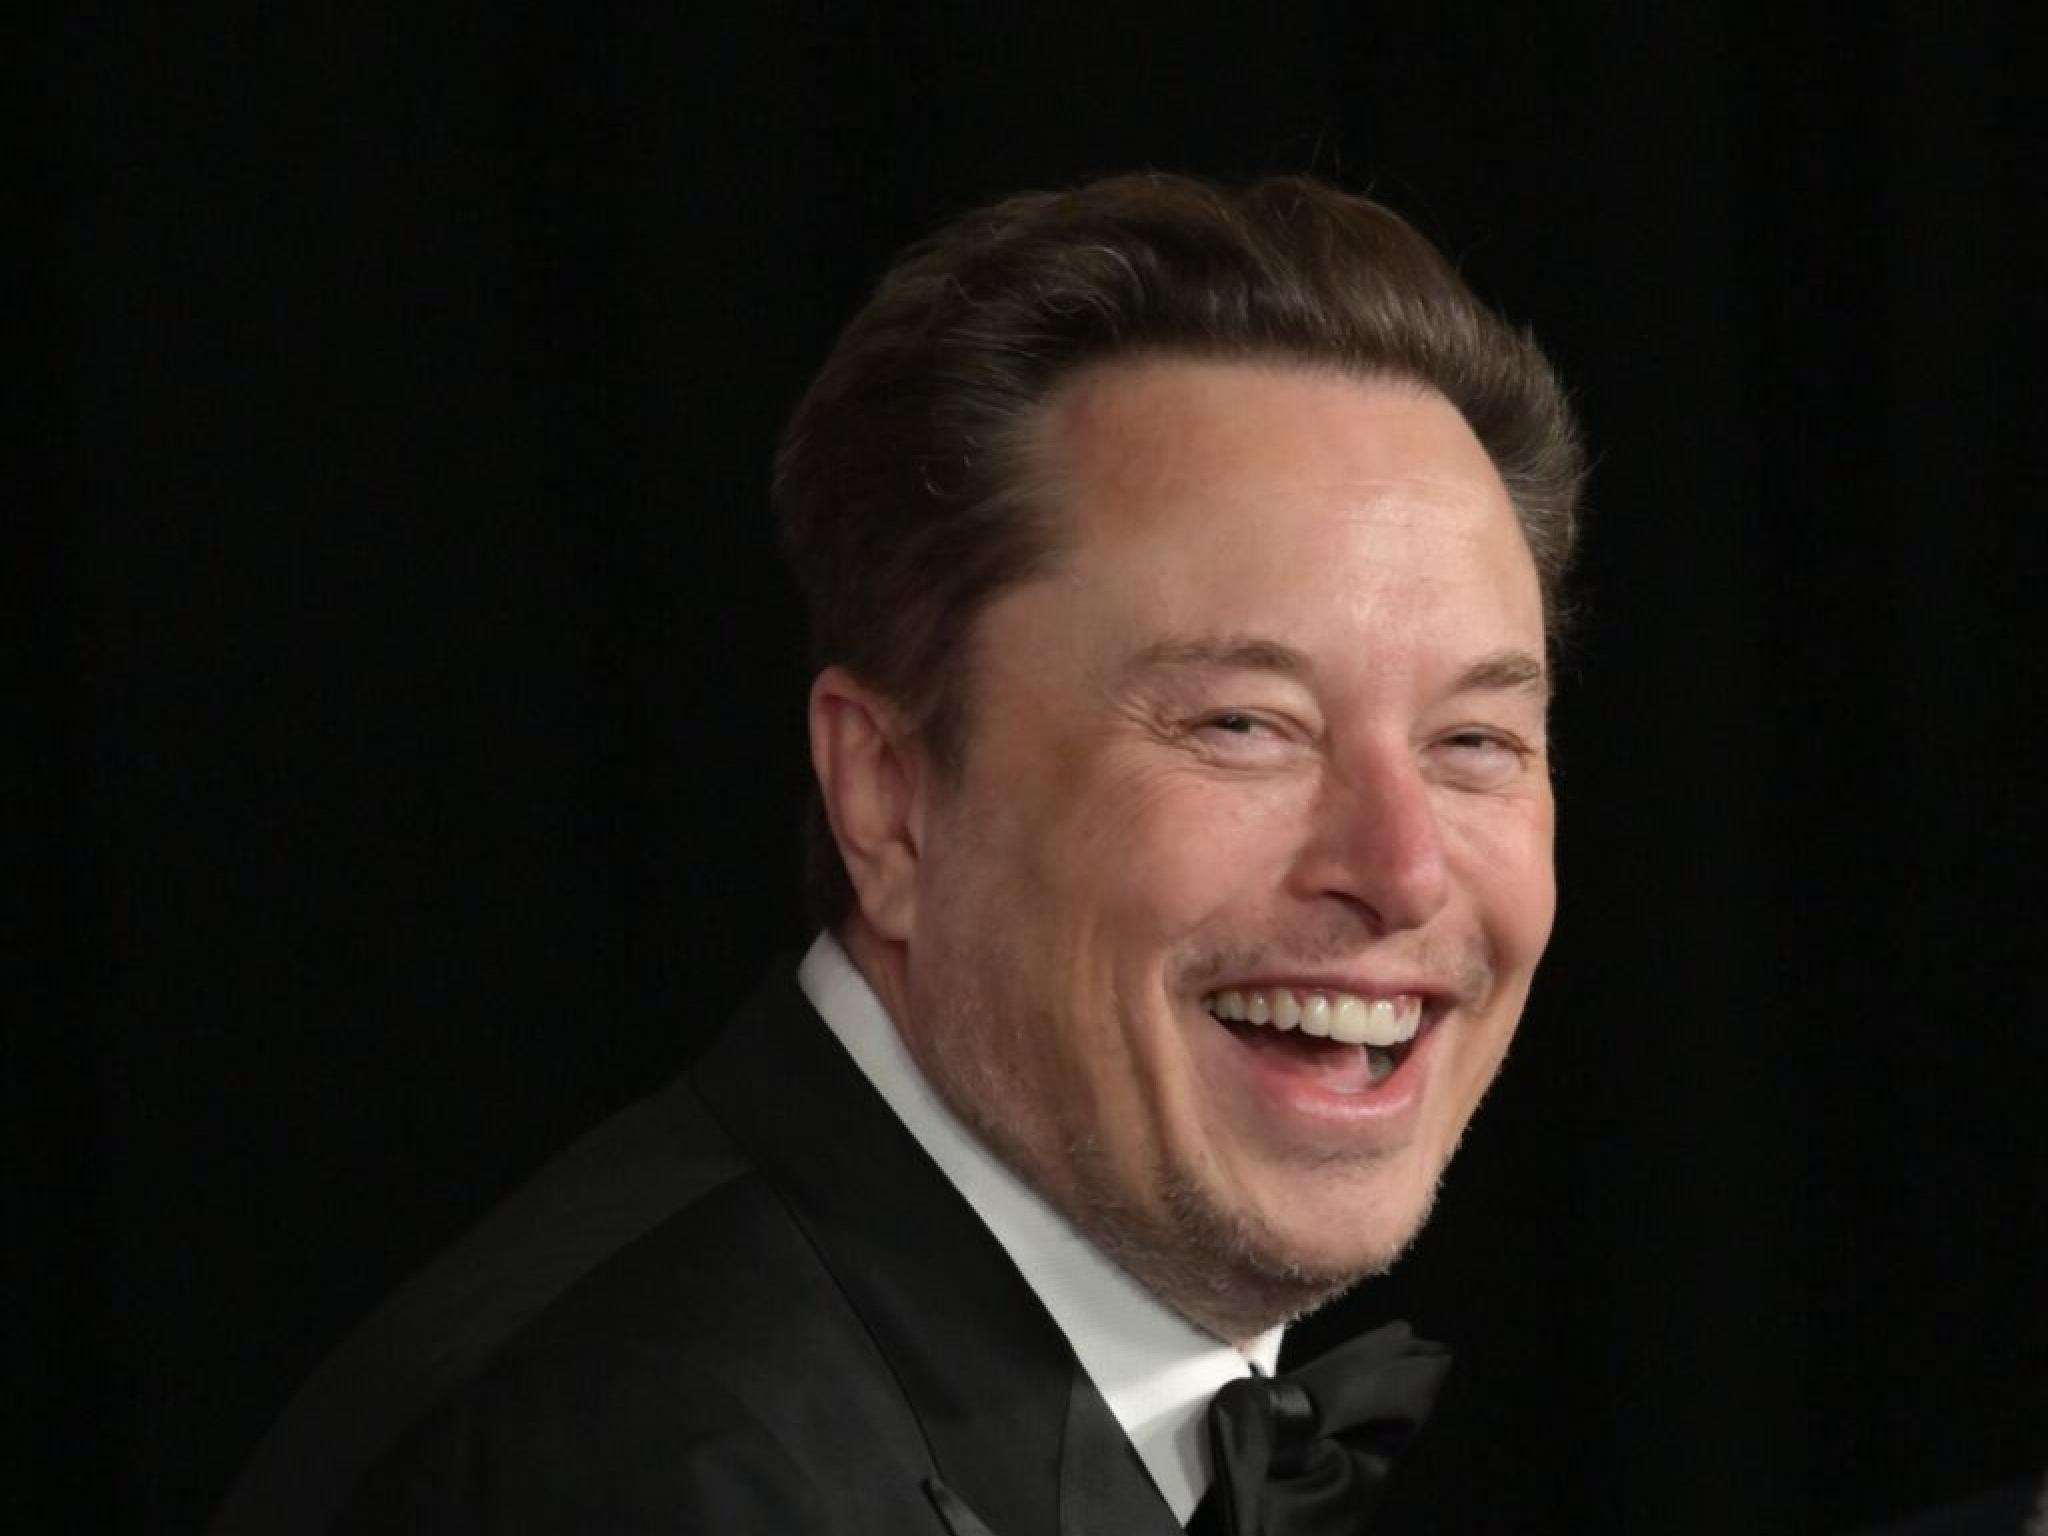  elon-musk-likes-games-originating-from-this-country-because-they-havent-been-corrupted-by-woke-dei-lies 